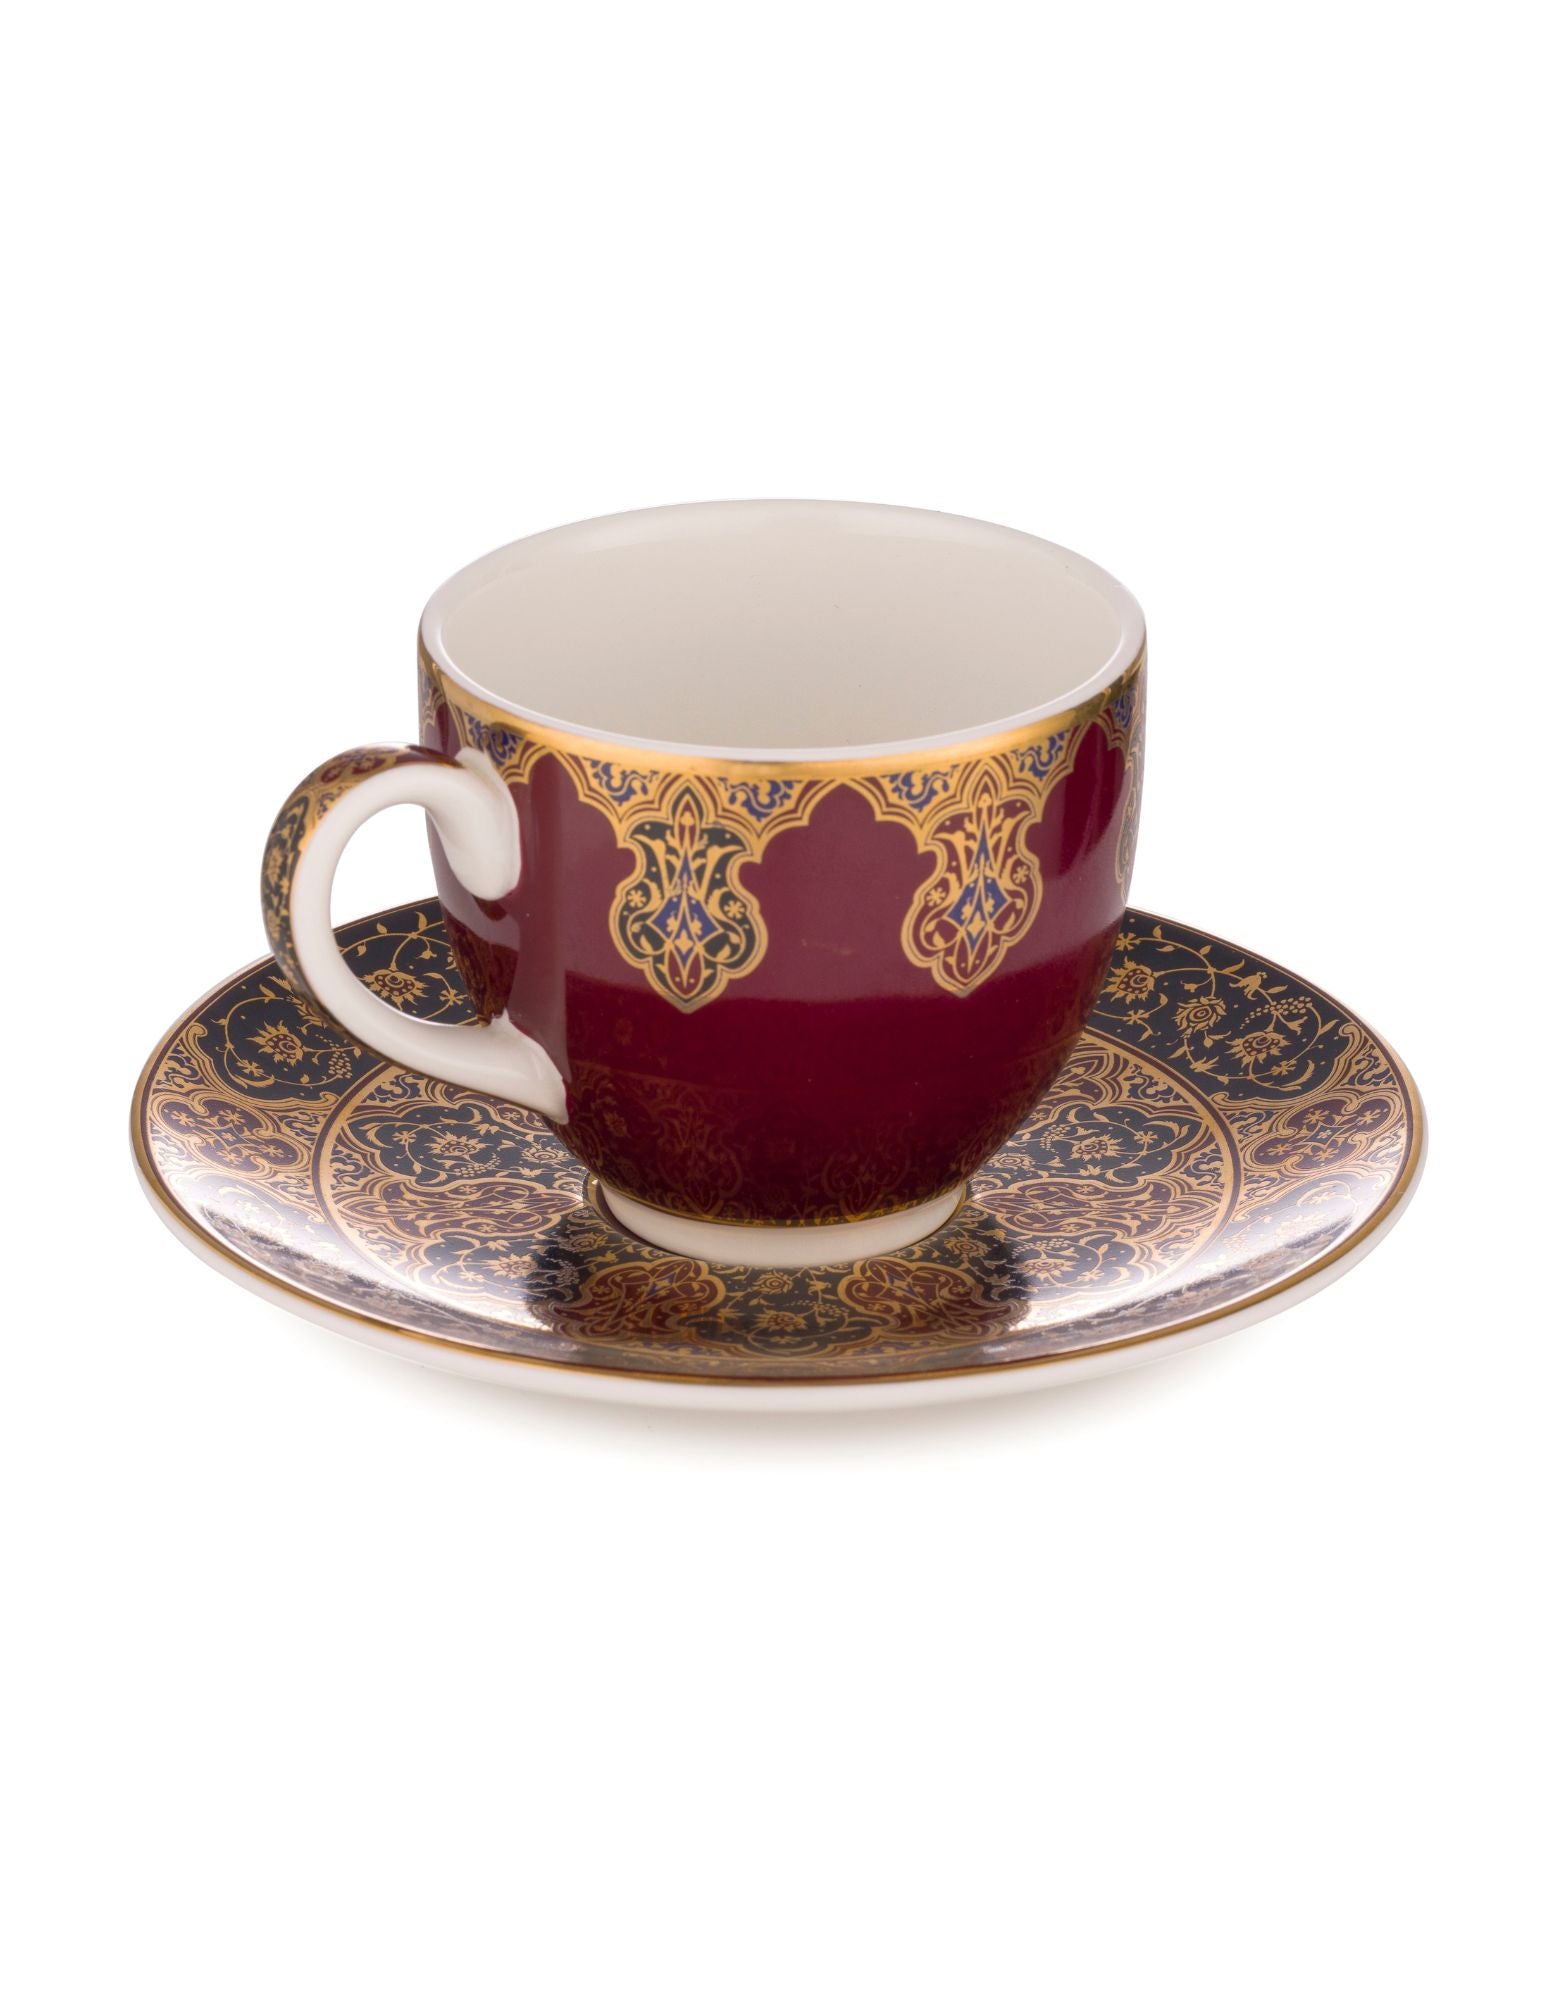 Luxury Tea cup and saucer - Begum collection